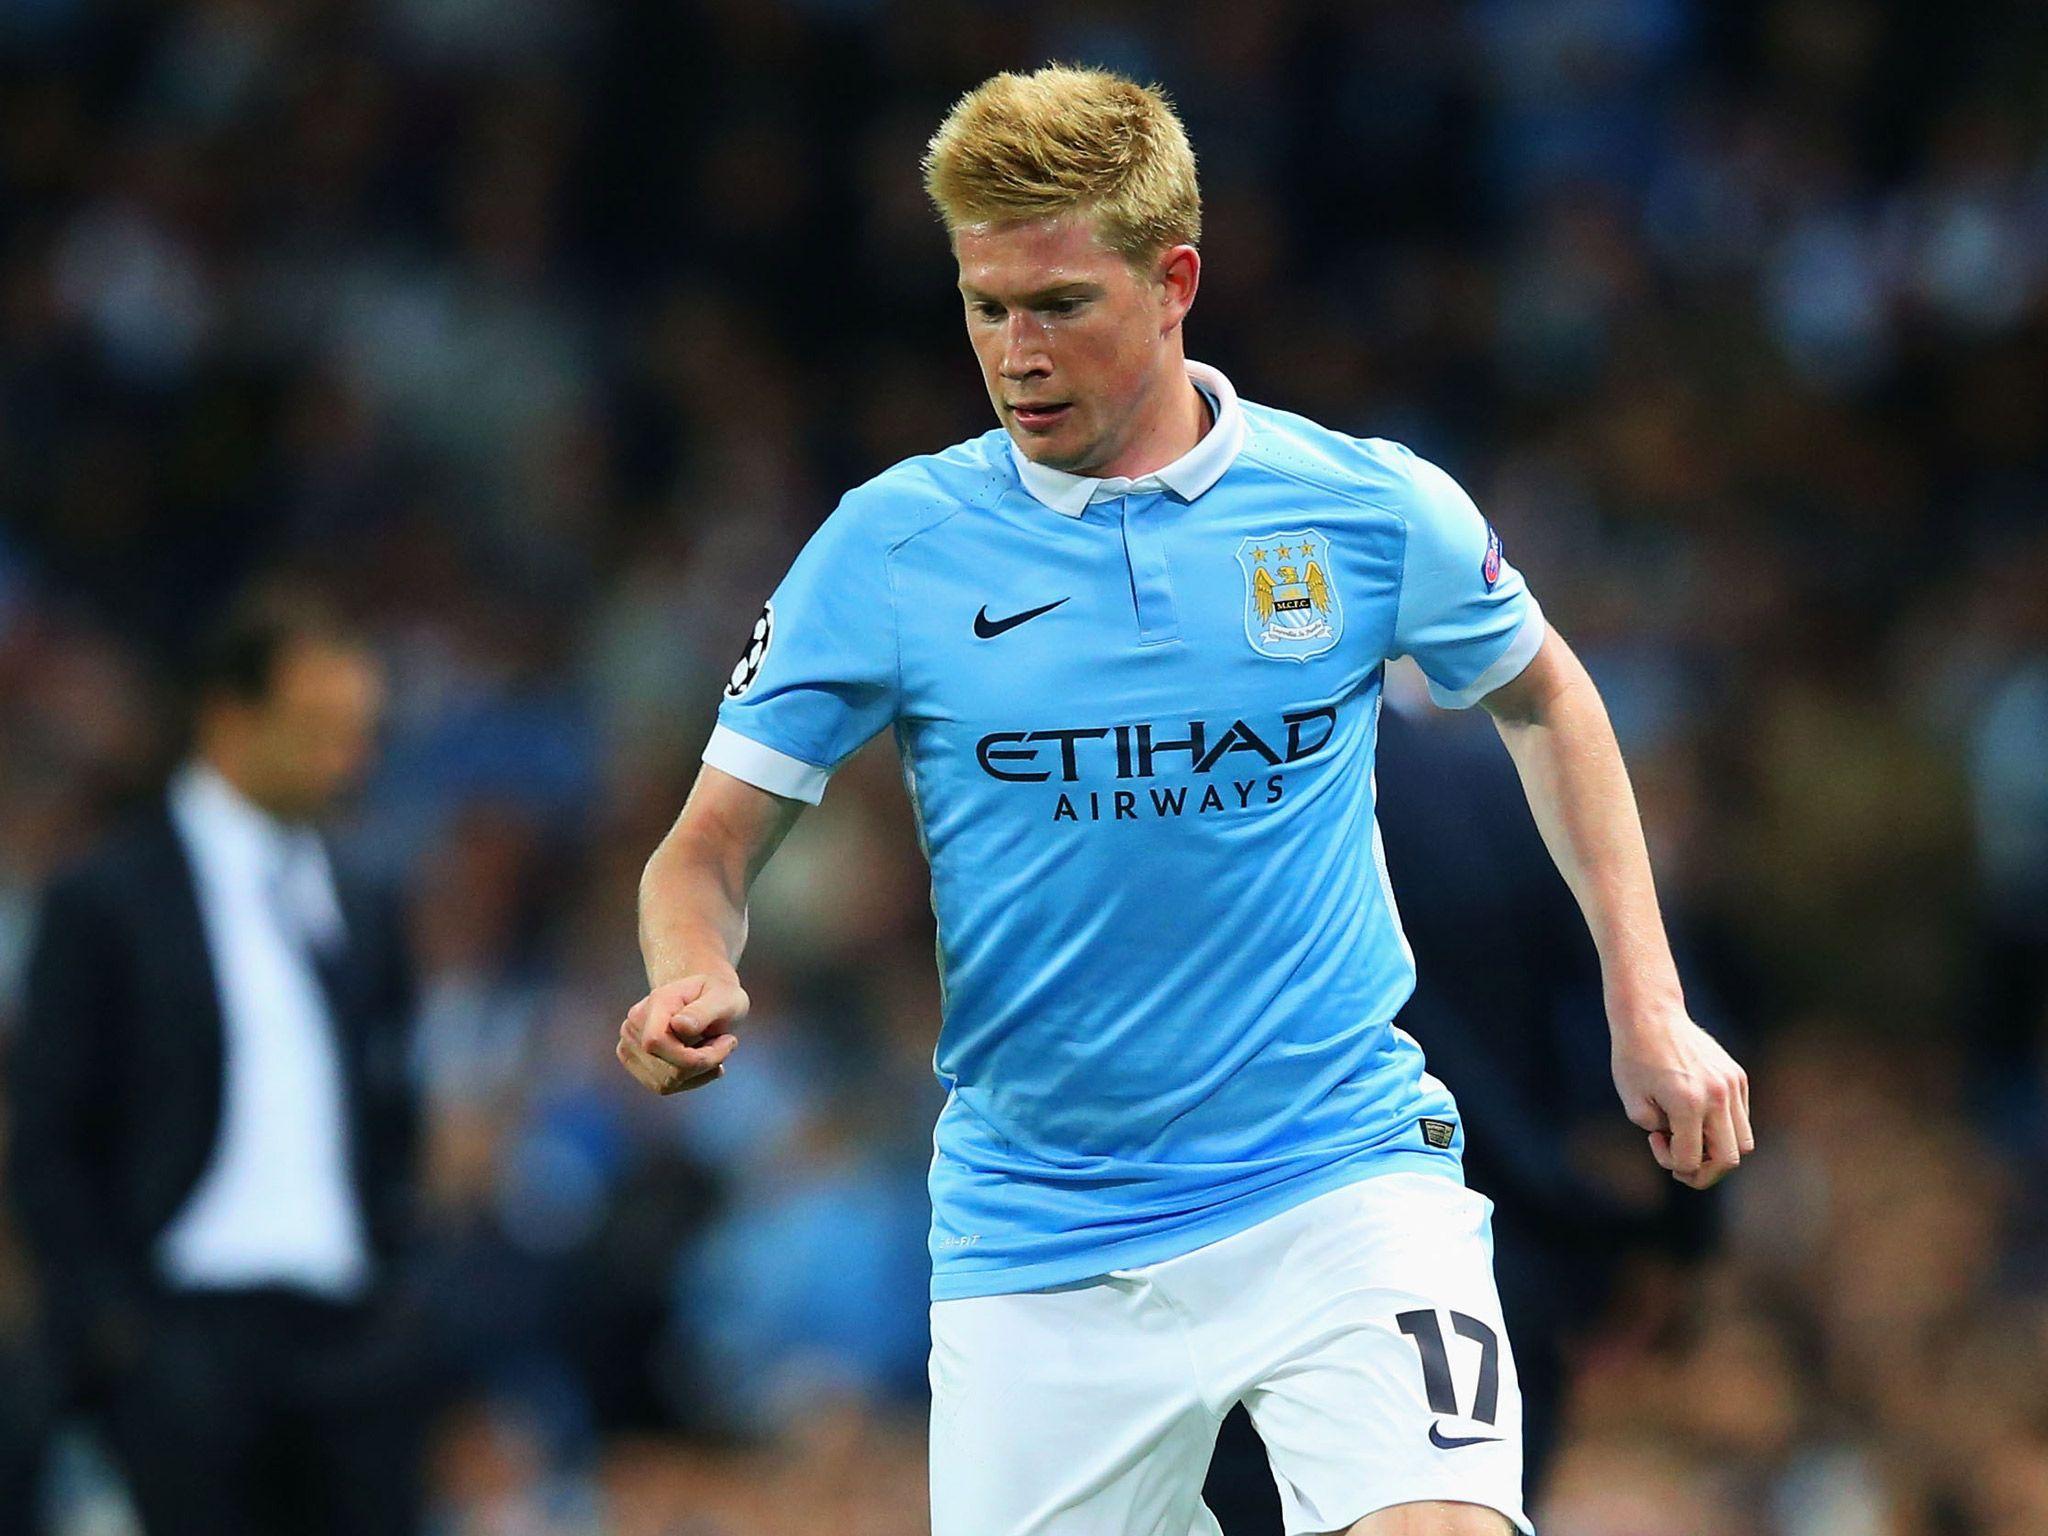 Kevin De Bruyne Image Wallpaper Background of Your Choice